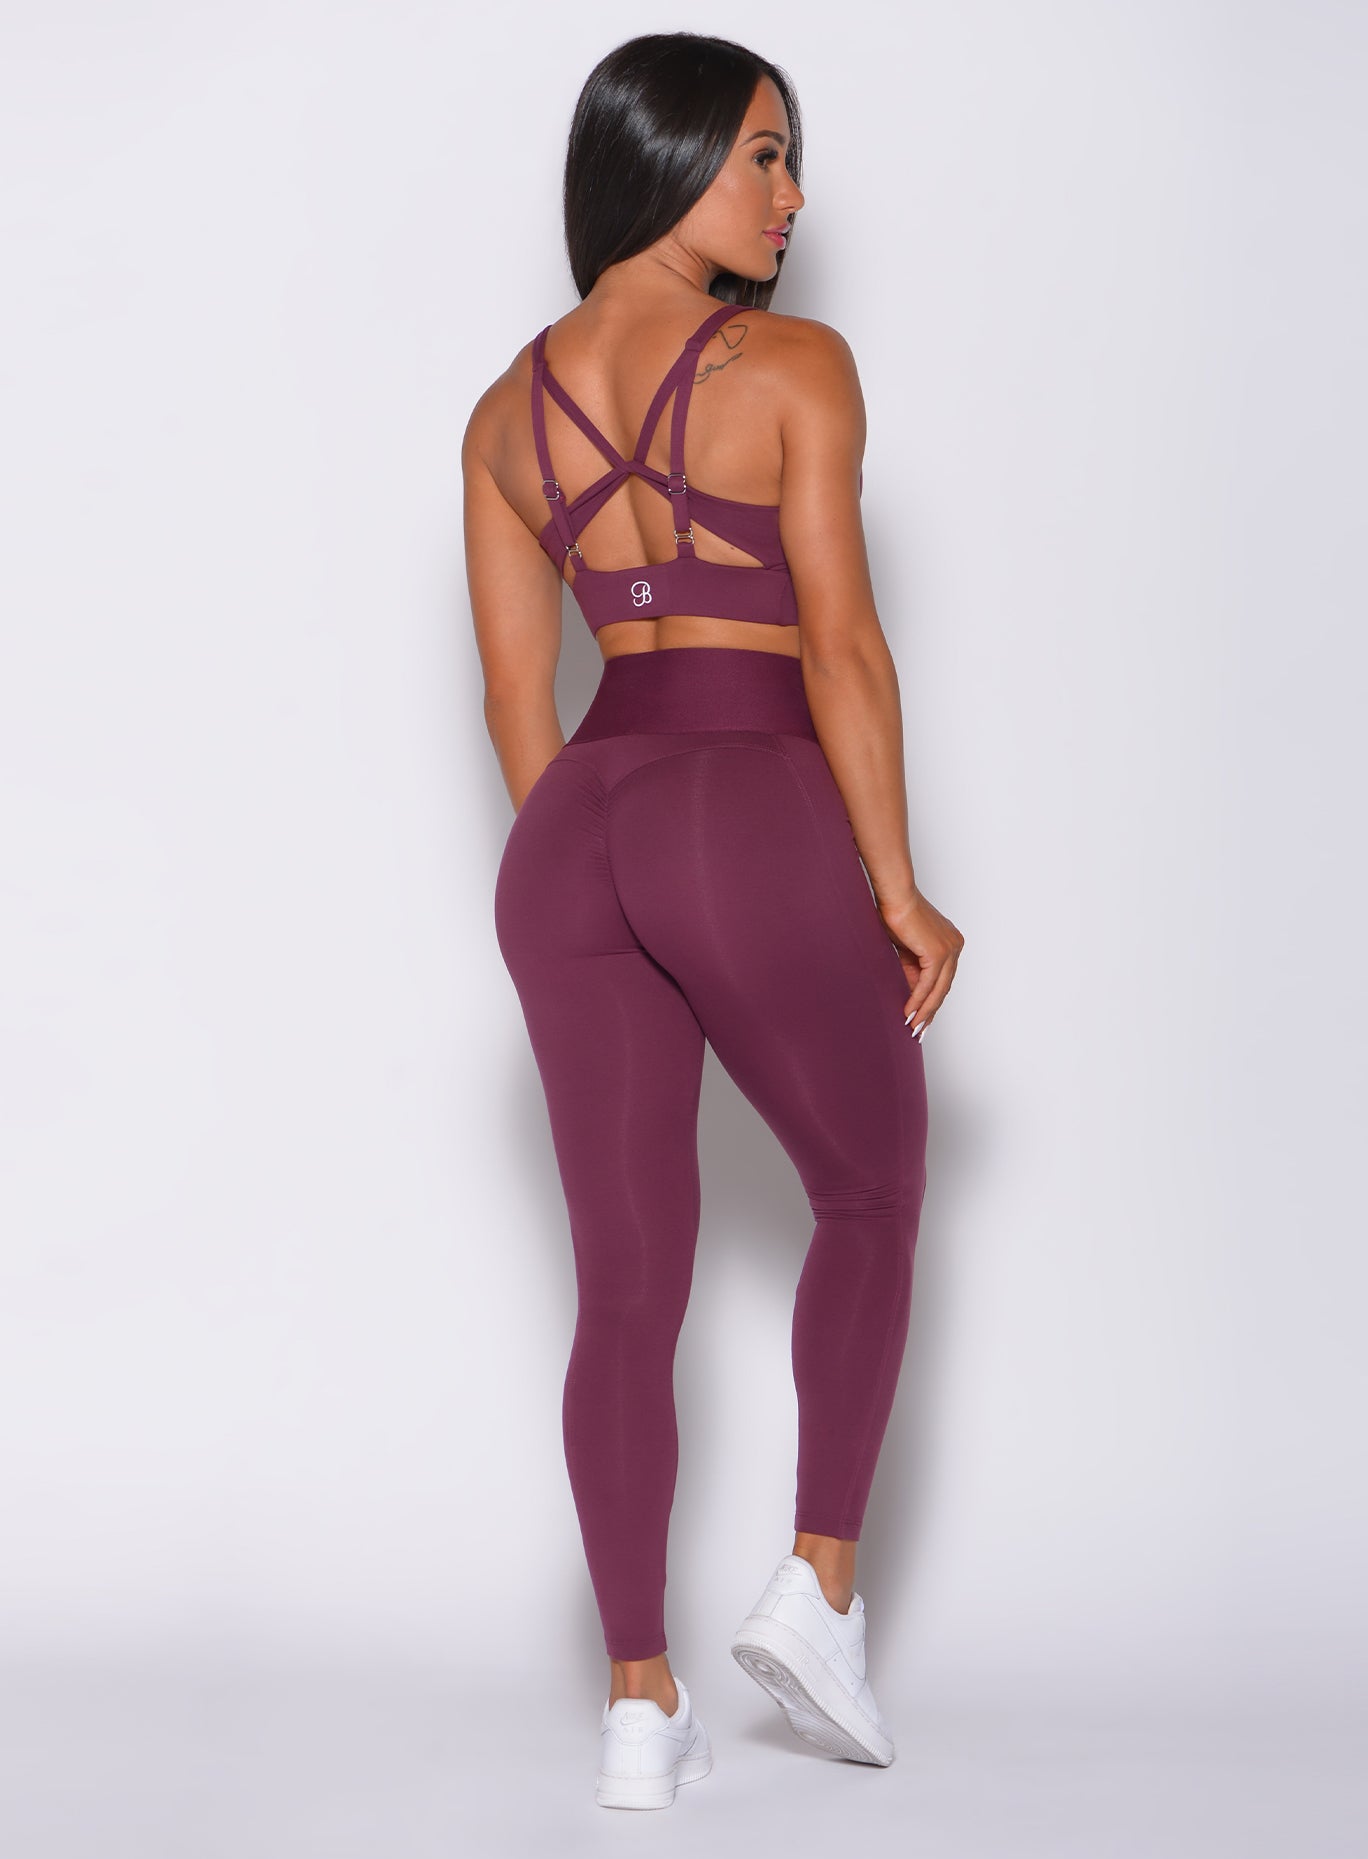 back profile view of a model wearing our impact sports bra in majestic purple color and a matching leggings